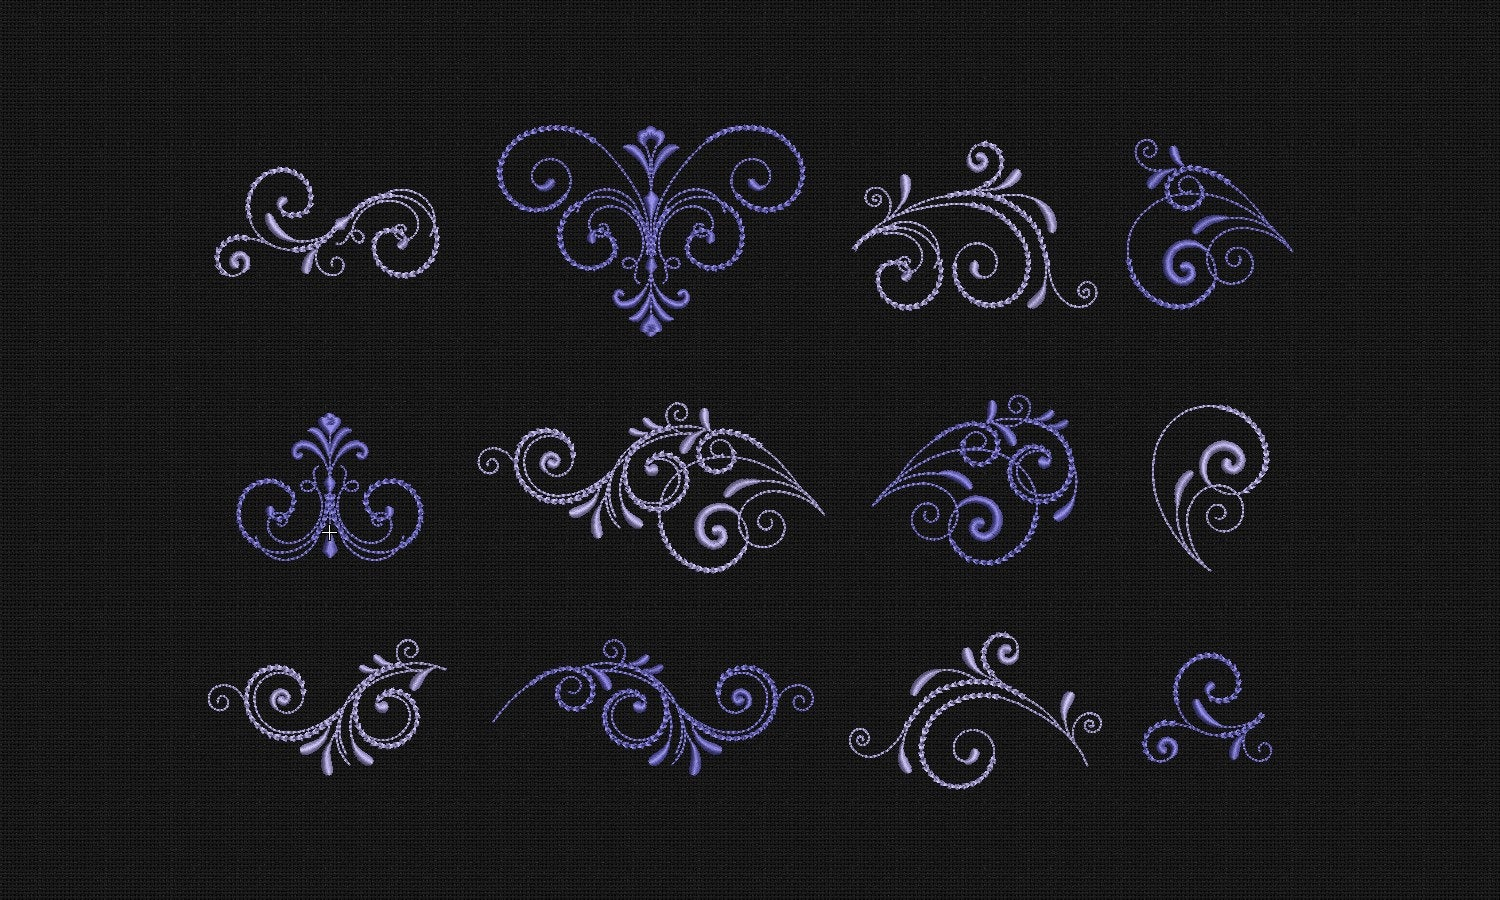 Machine Embroidery Patterns Embroidery Designs Vintage Swirl Set 12 Items Instant Download Borders Curls Machine Embroidery 5x7 Embroidery Patterns Ornament Design